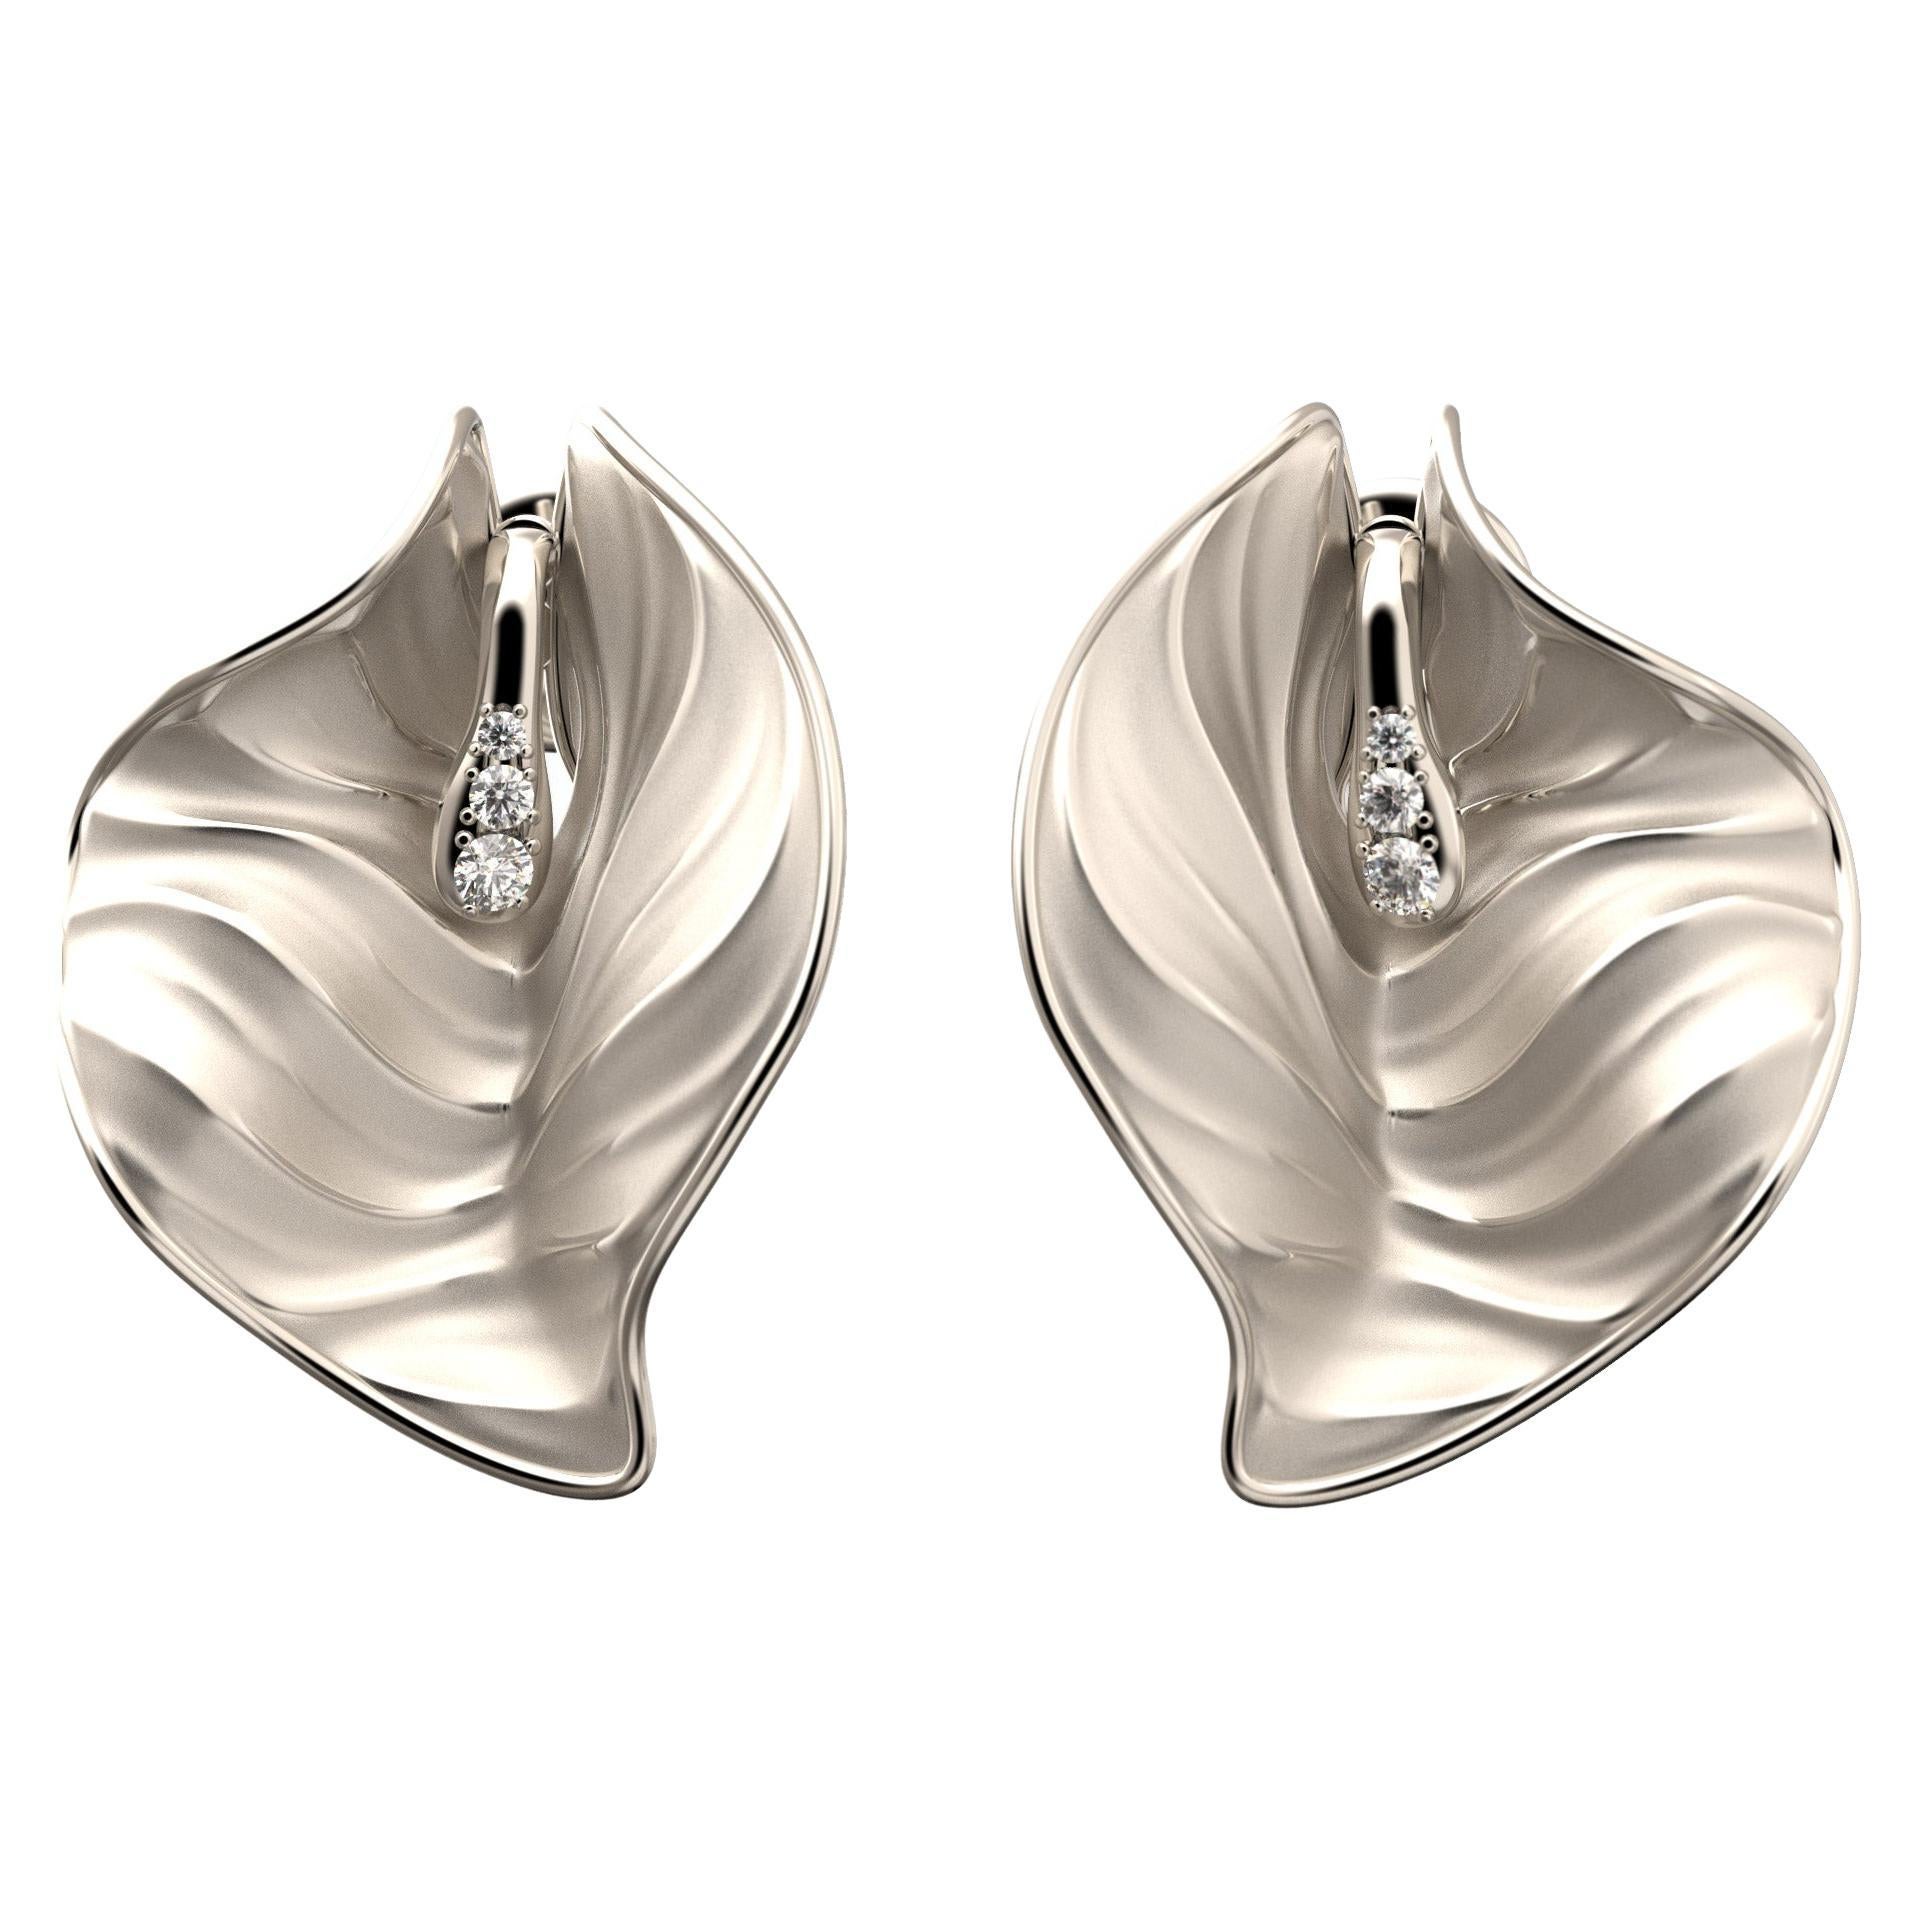 Calla earrings have an interplay of sinuous movements, embellished by the diamonds set on the pistil.
A sophisticated and unique piece of jewelry.  
Vento is a collection created to enhance feminine beauty with soft surface movements that dance like